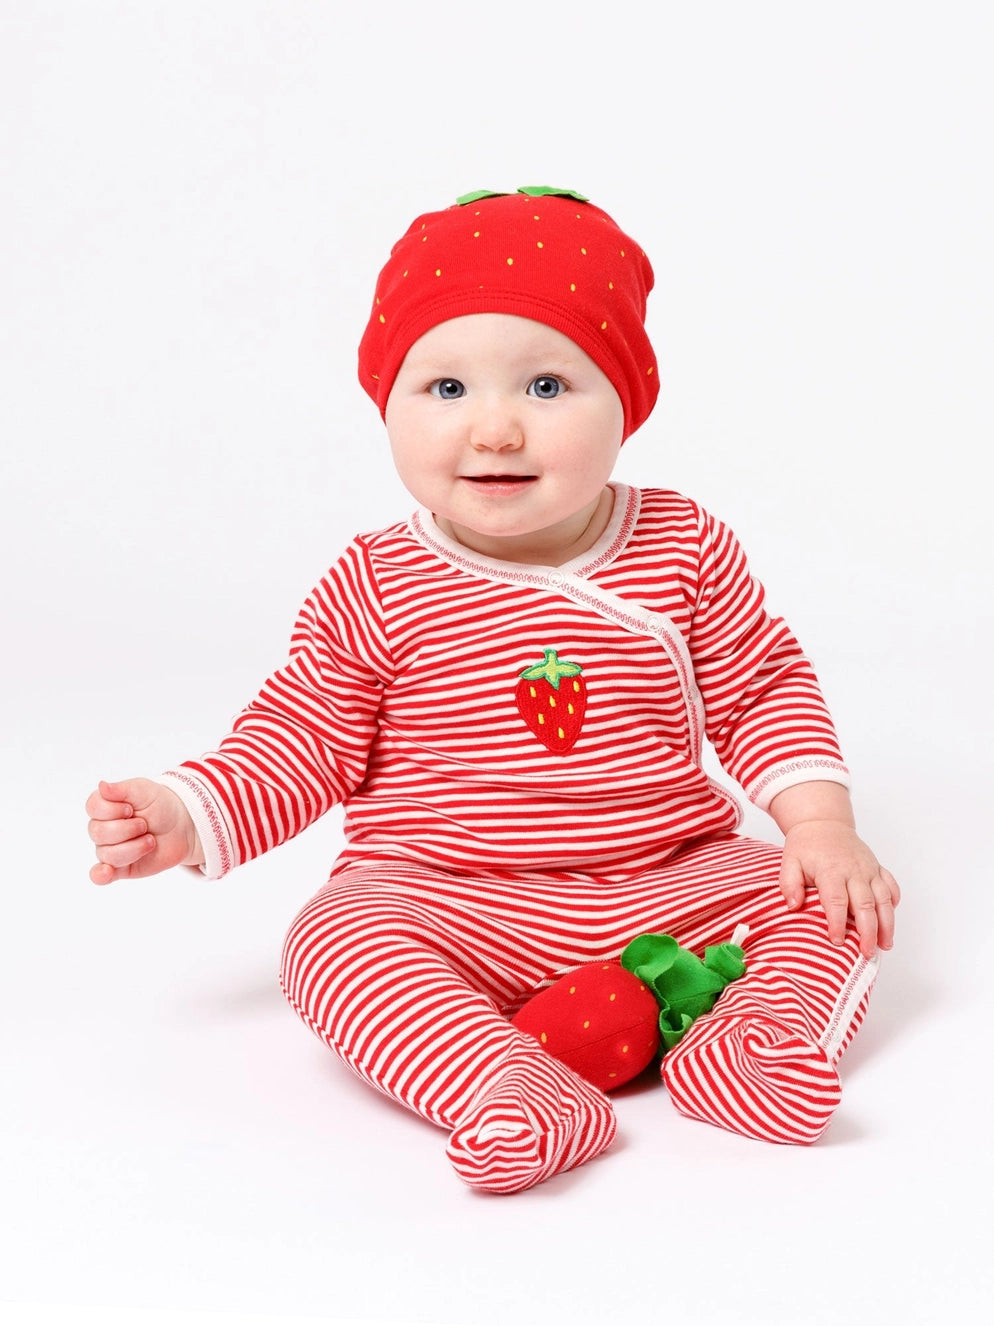 baby in a strawberry themed outfit holding a strawberry toy